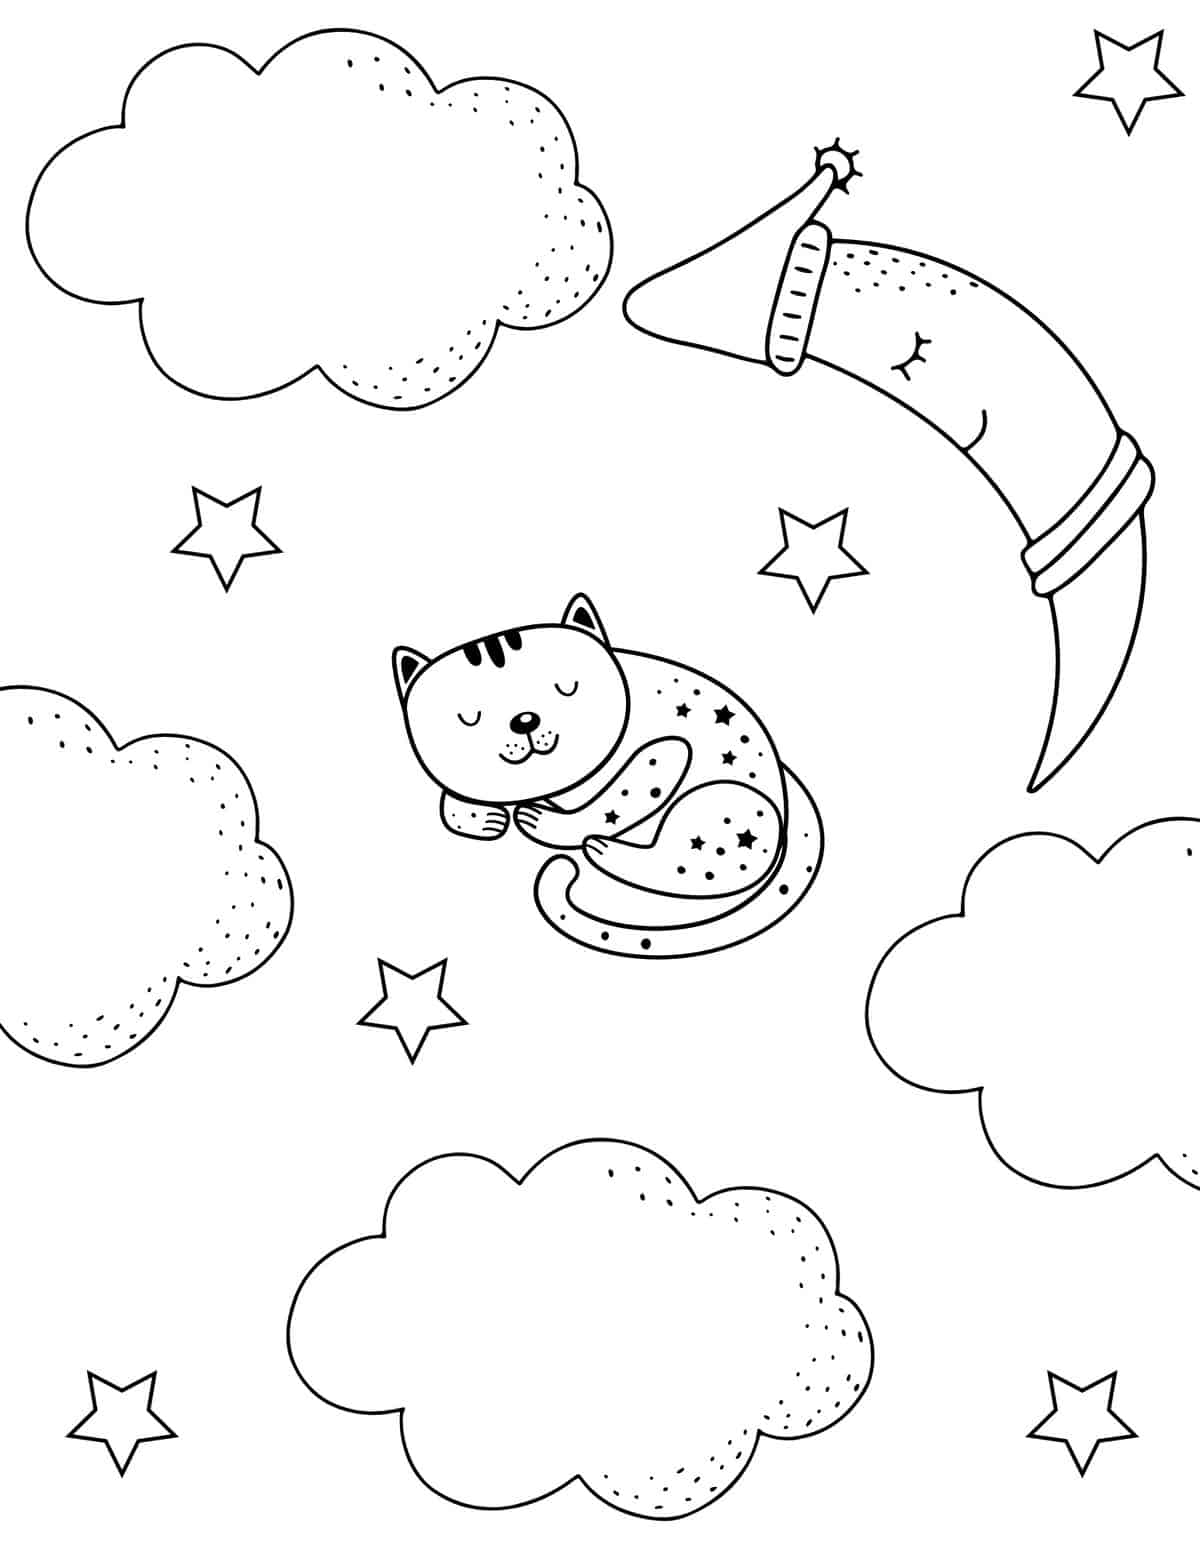 cat curled up sleeping in the sky with a moon, clouds and stars in the background